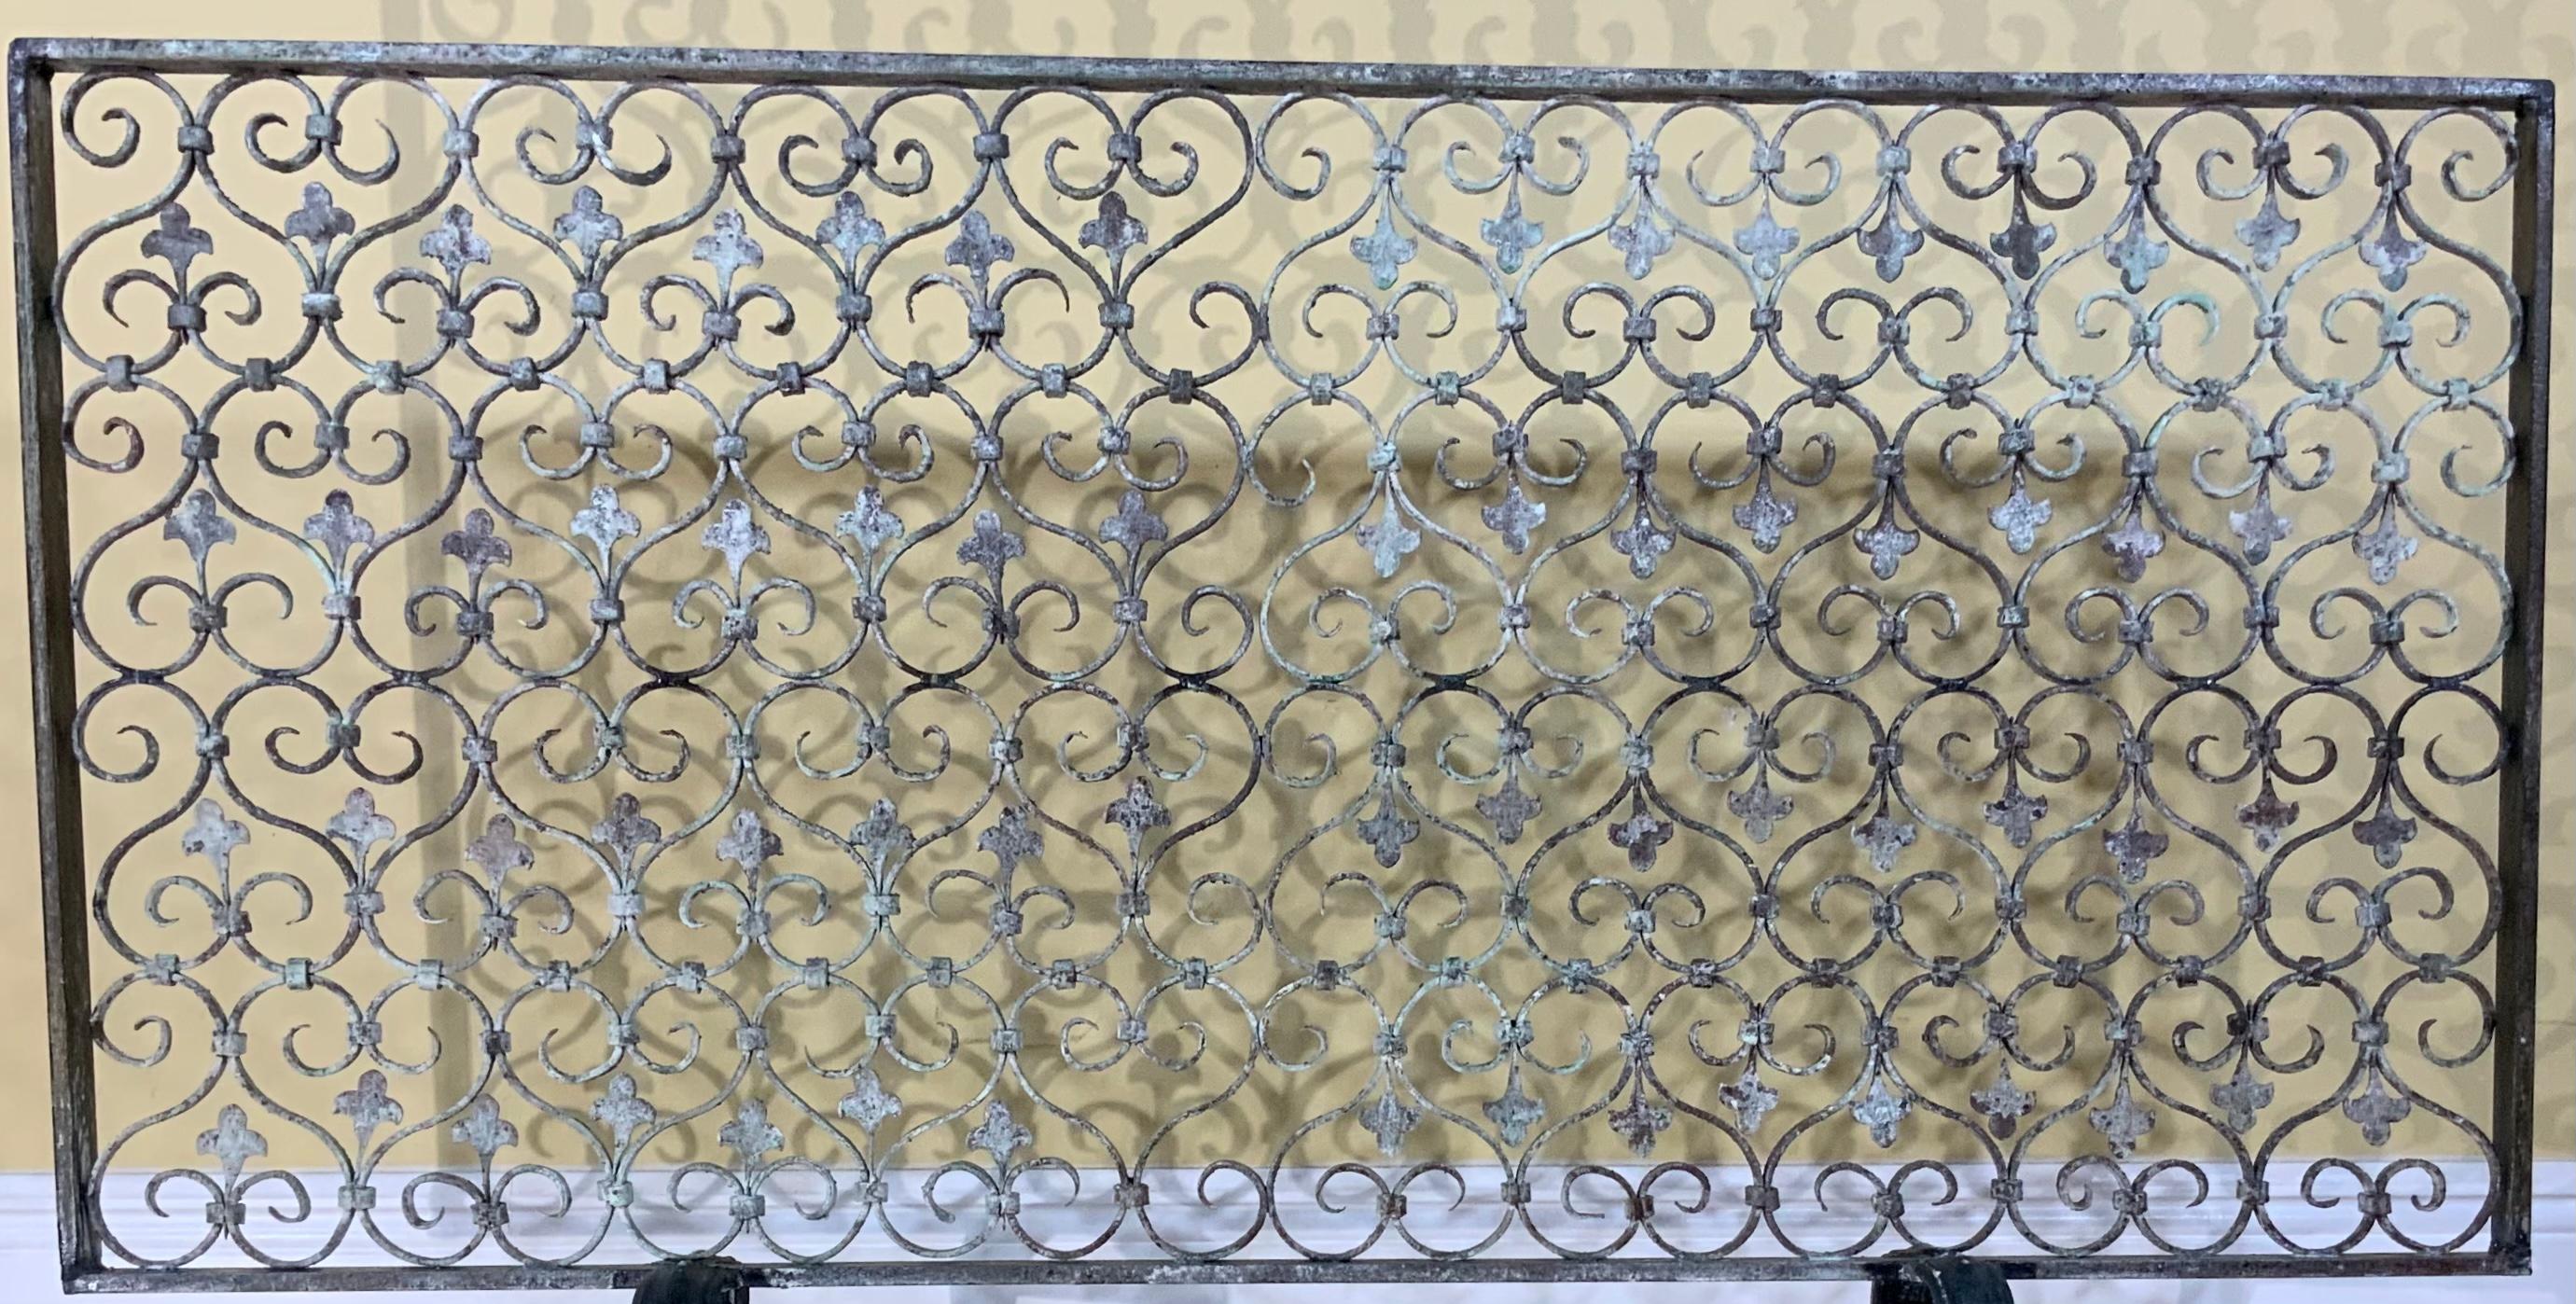 Beautiful fireplace screen made of hand forged iron with decorative repeated motifs of scrolls and three leaves
Originally it was gate in a Palm beach old estate and was salvage to become exceptional fireplace screen. Fireplace screen is treated